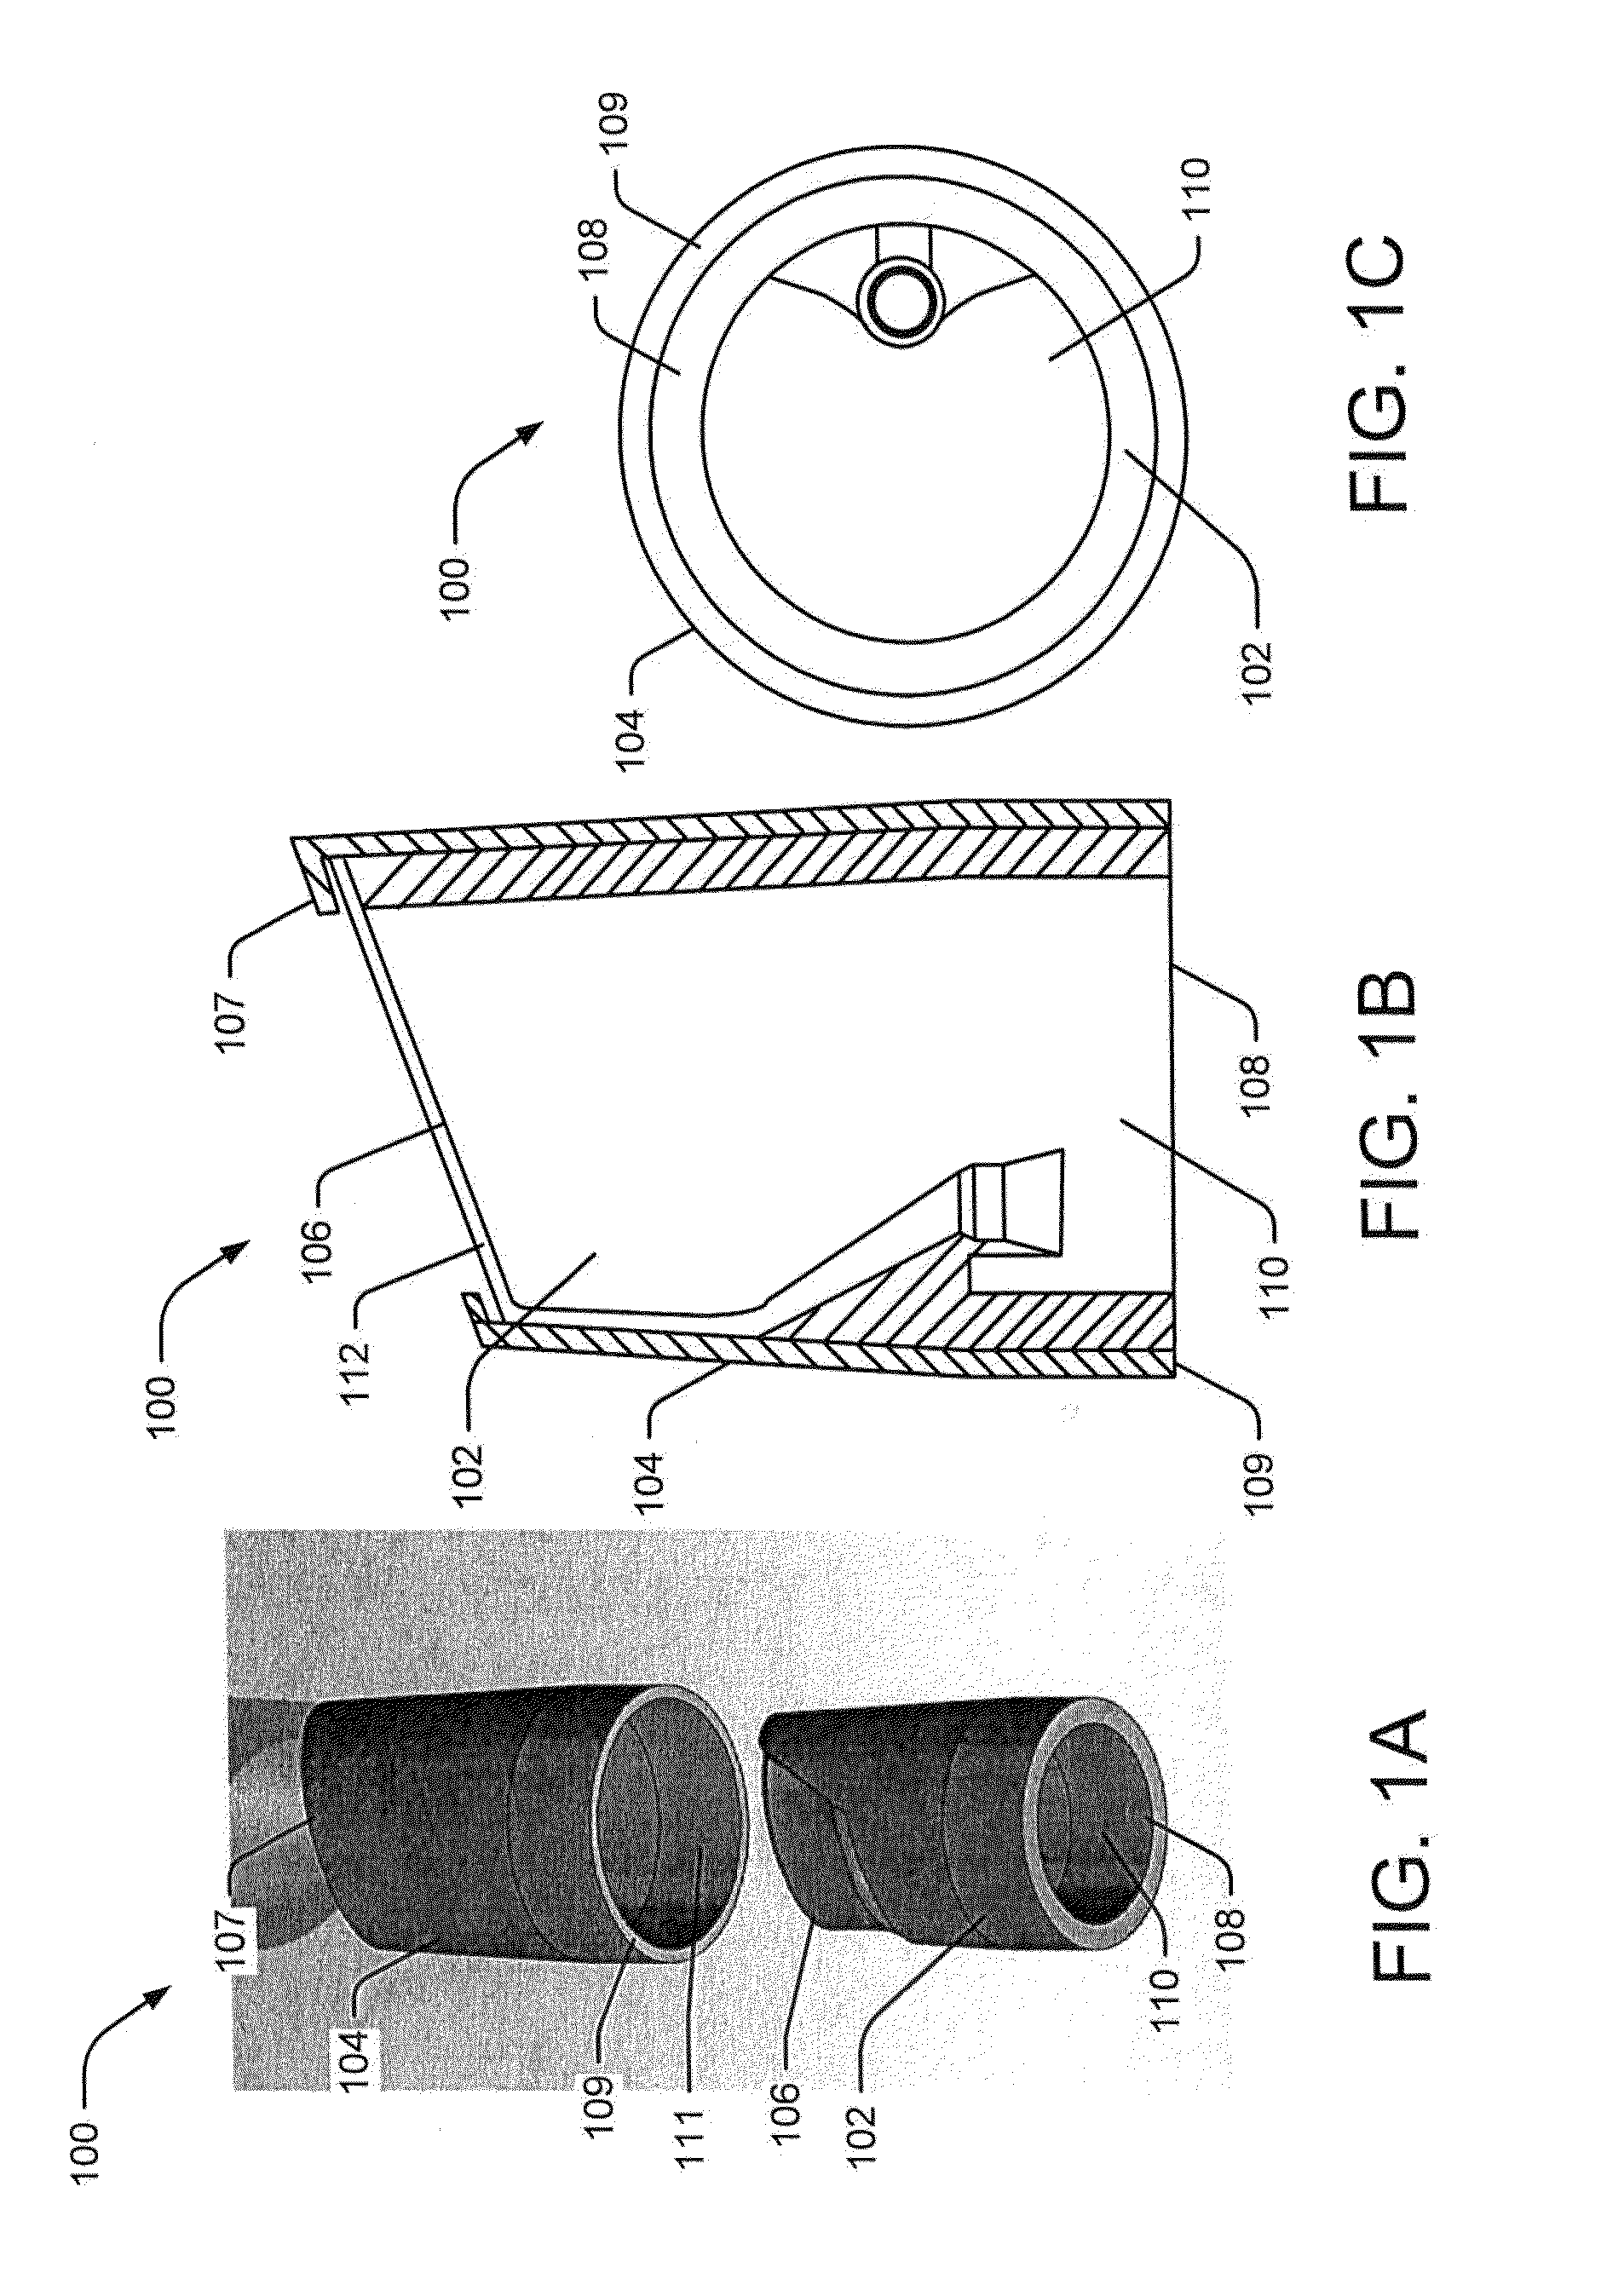 Mucosal resection device and related methods of use